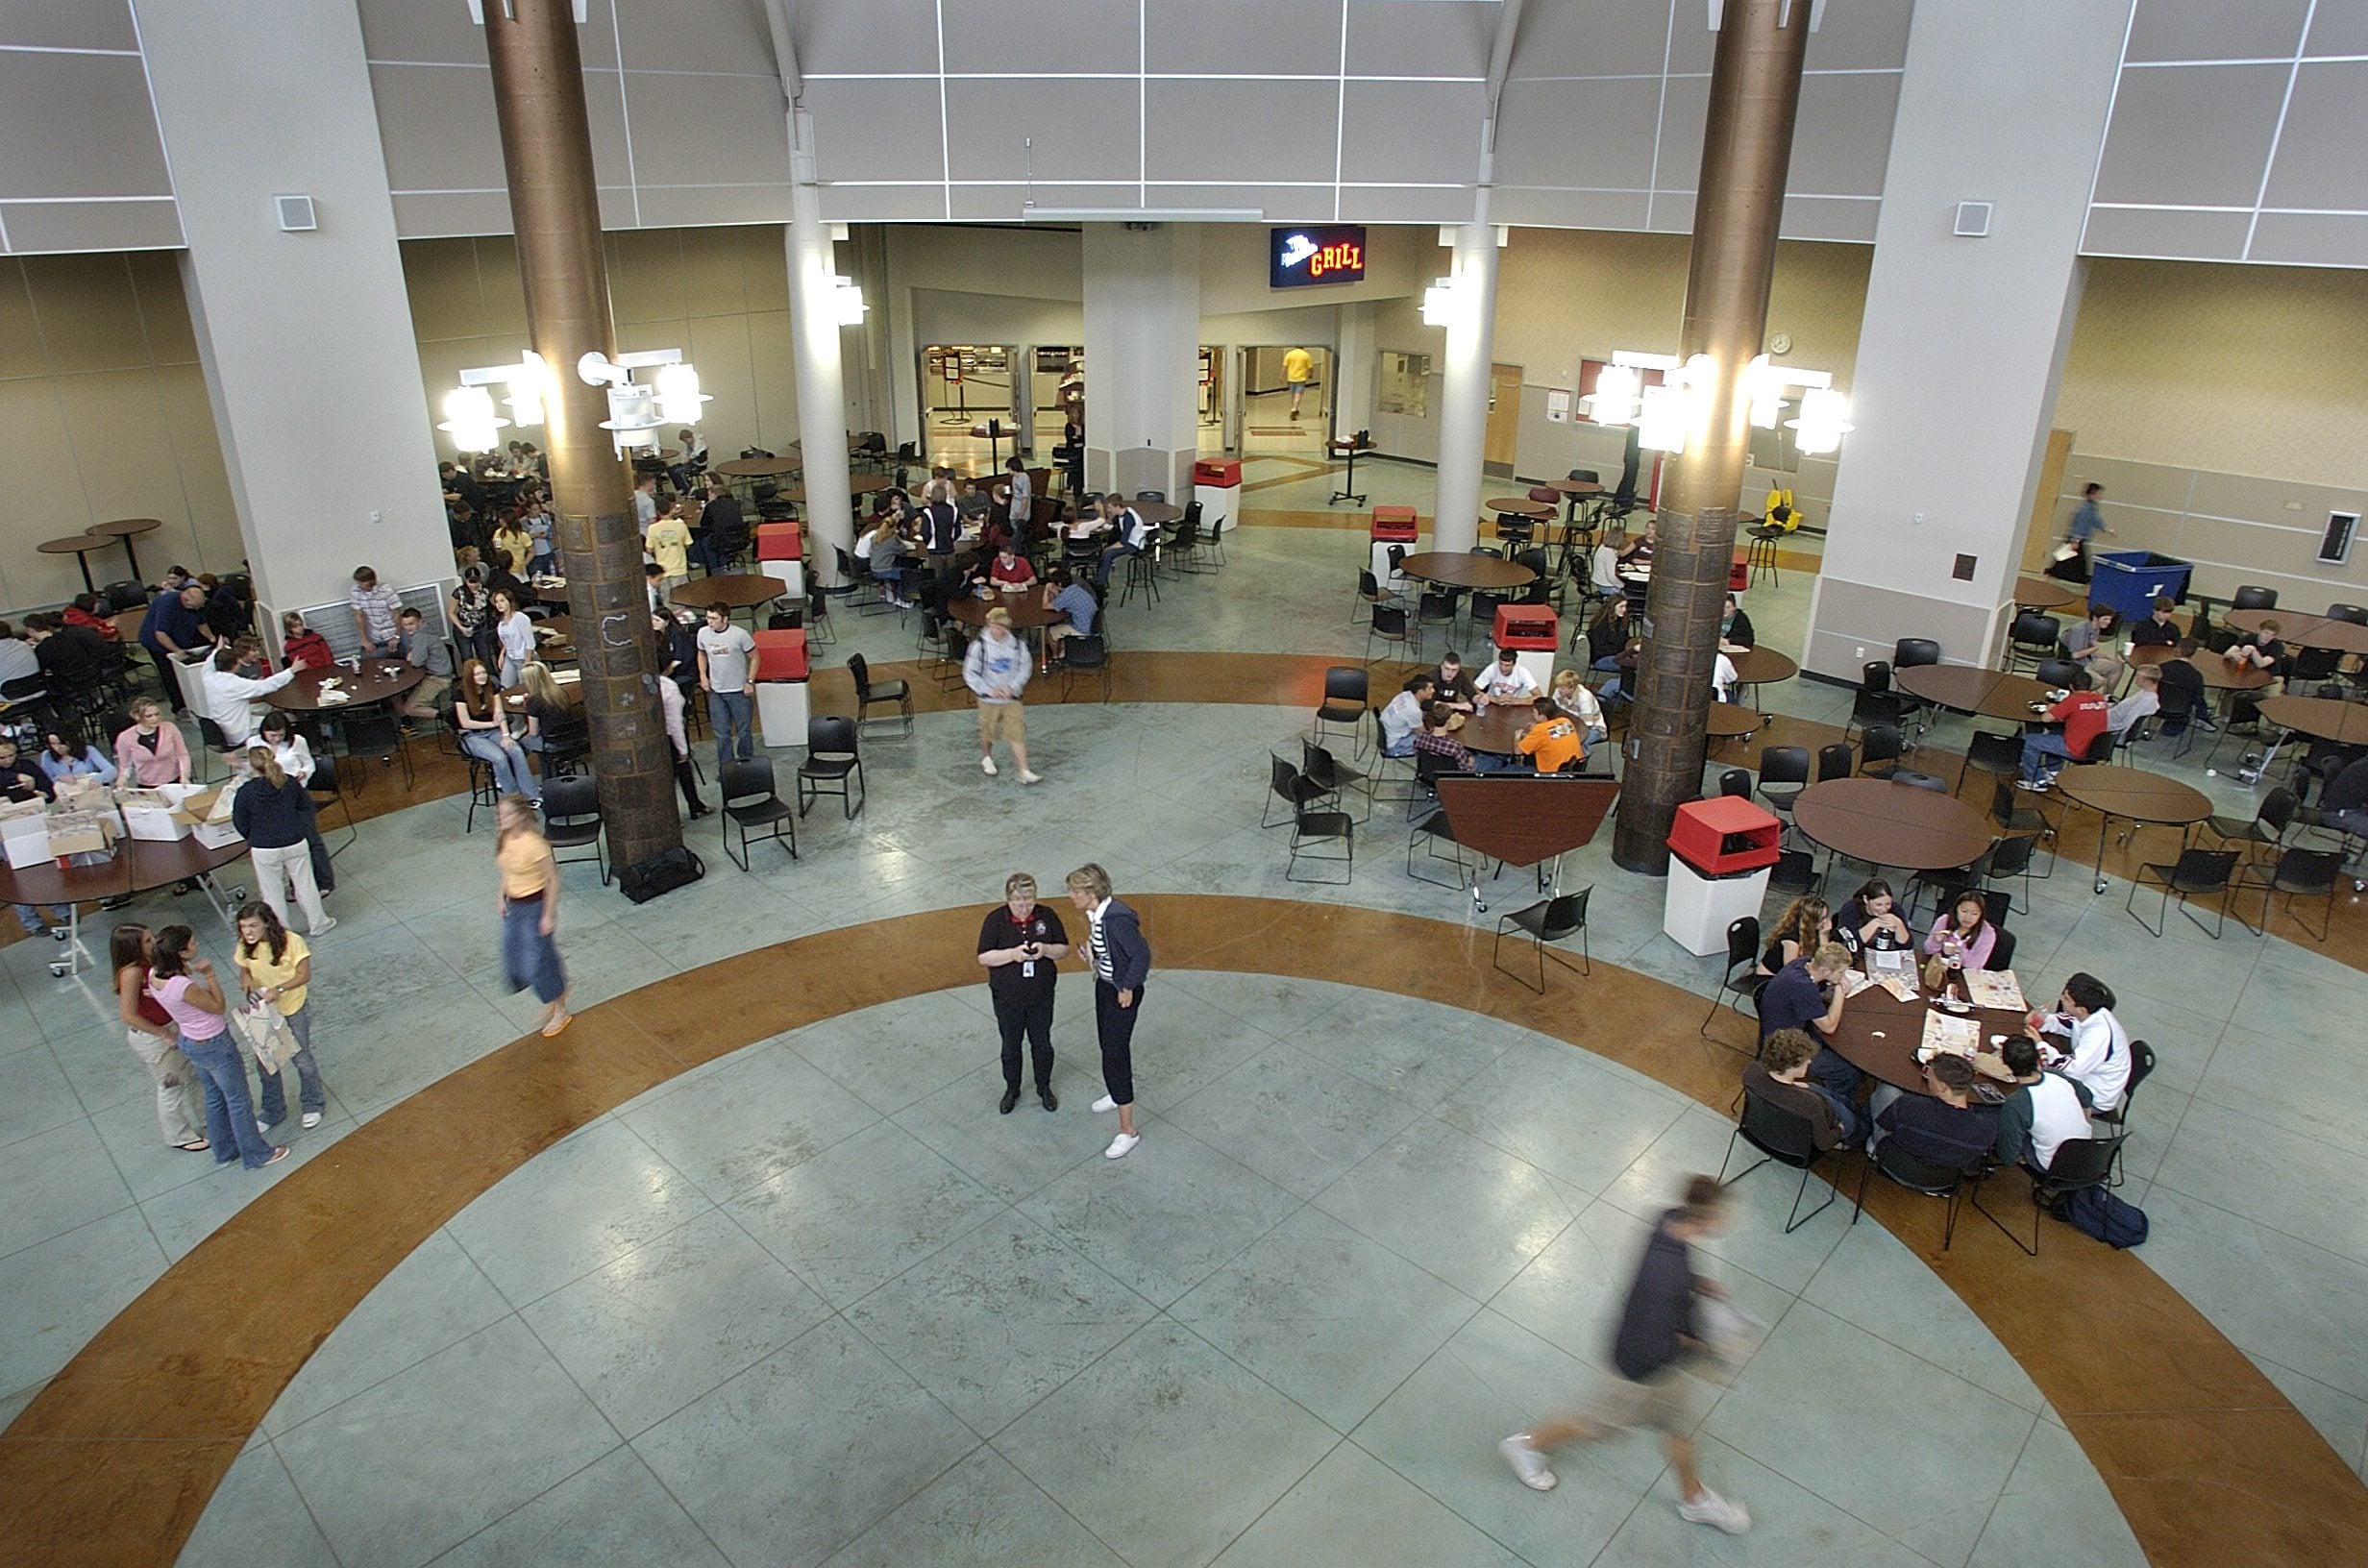 The commons area at Camas High School often is busy.